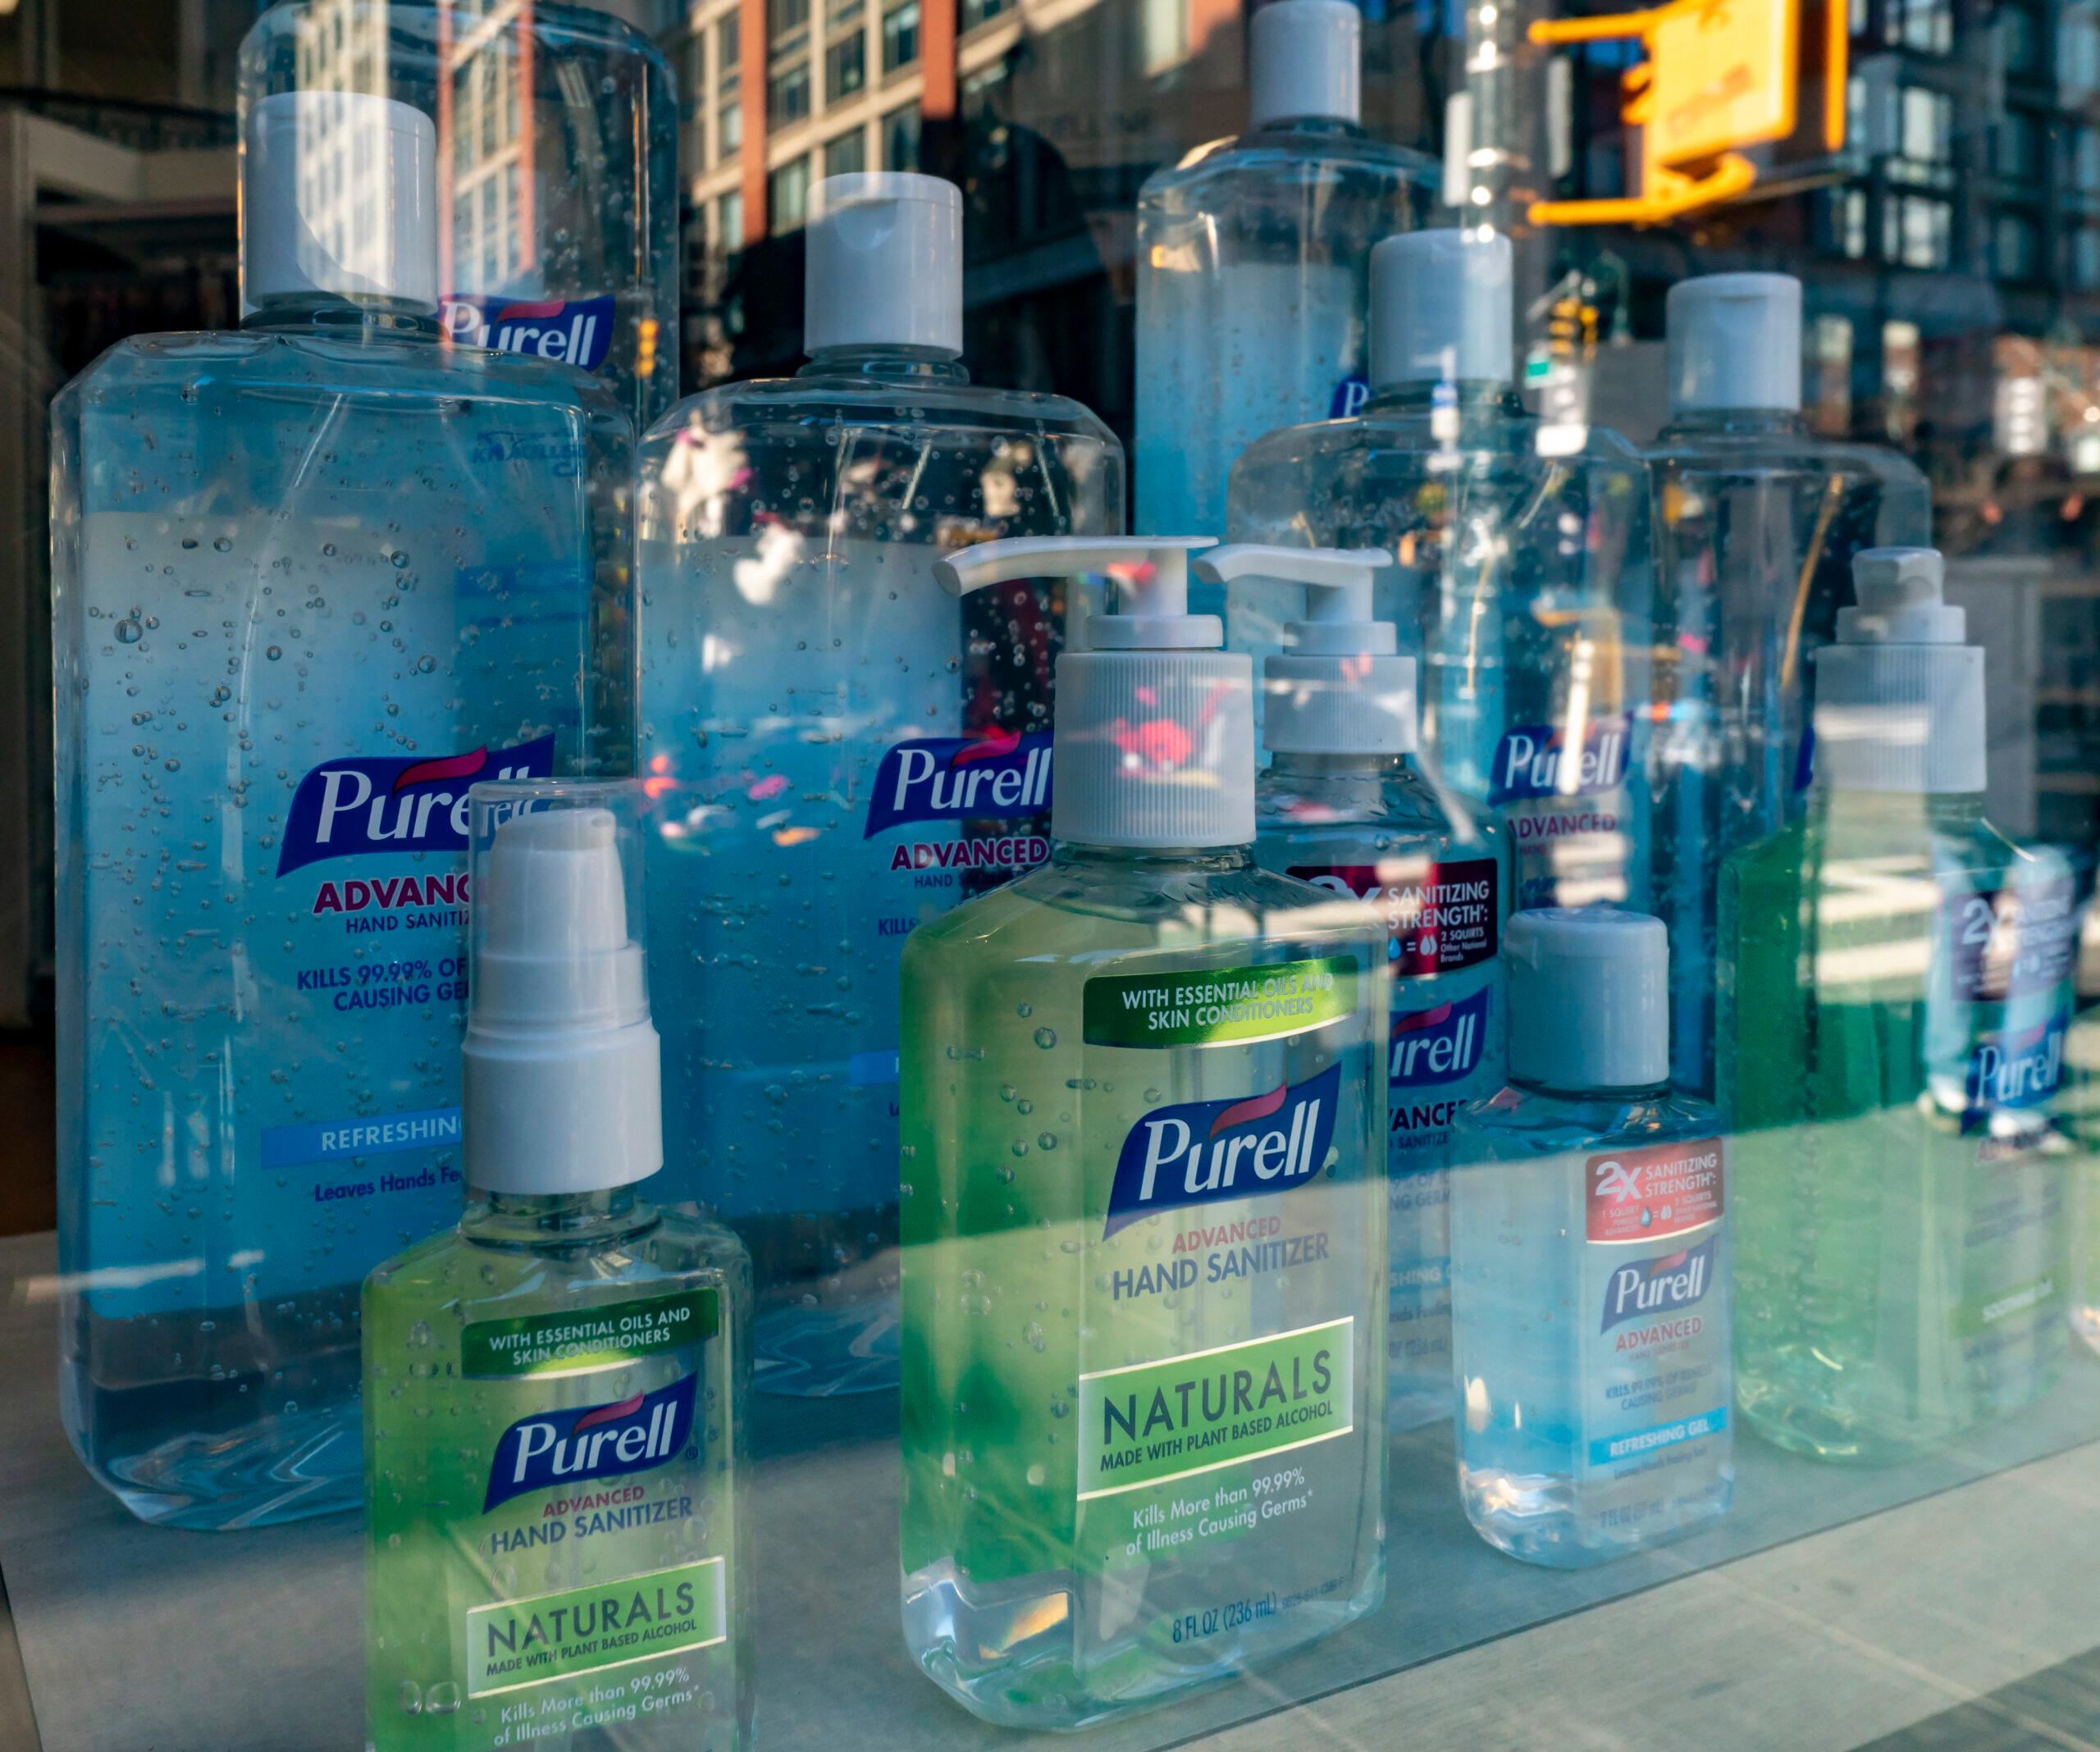 A display of Purell hand sanitizers in the window of a store in New York on Thursday, January 7, 2021. 